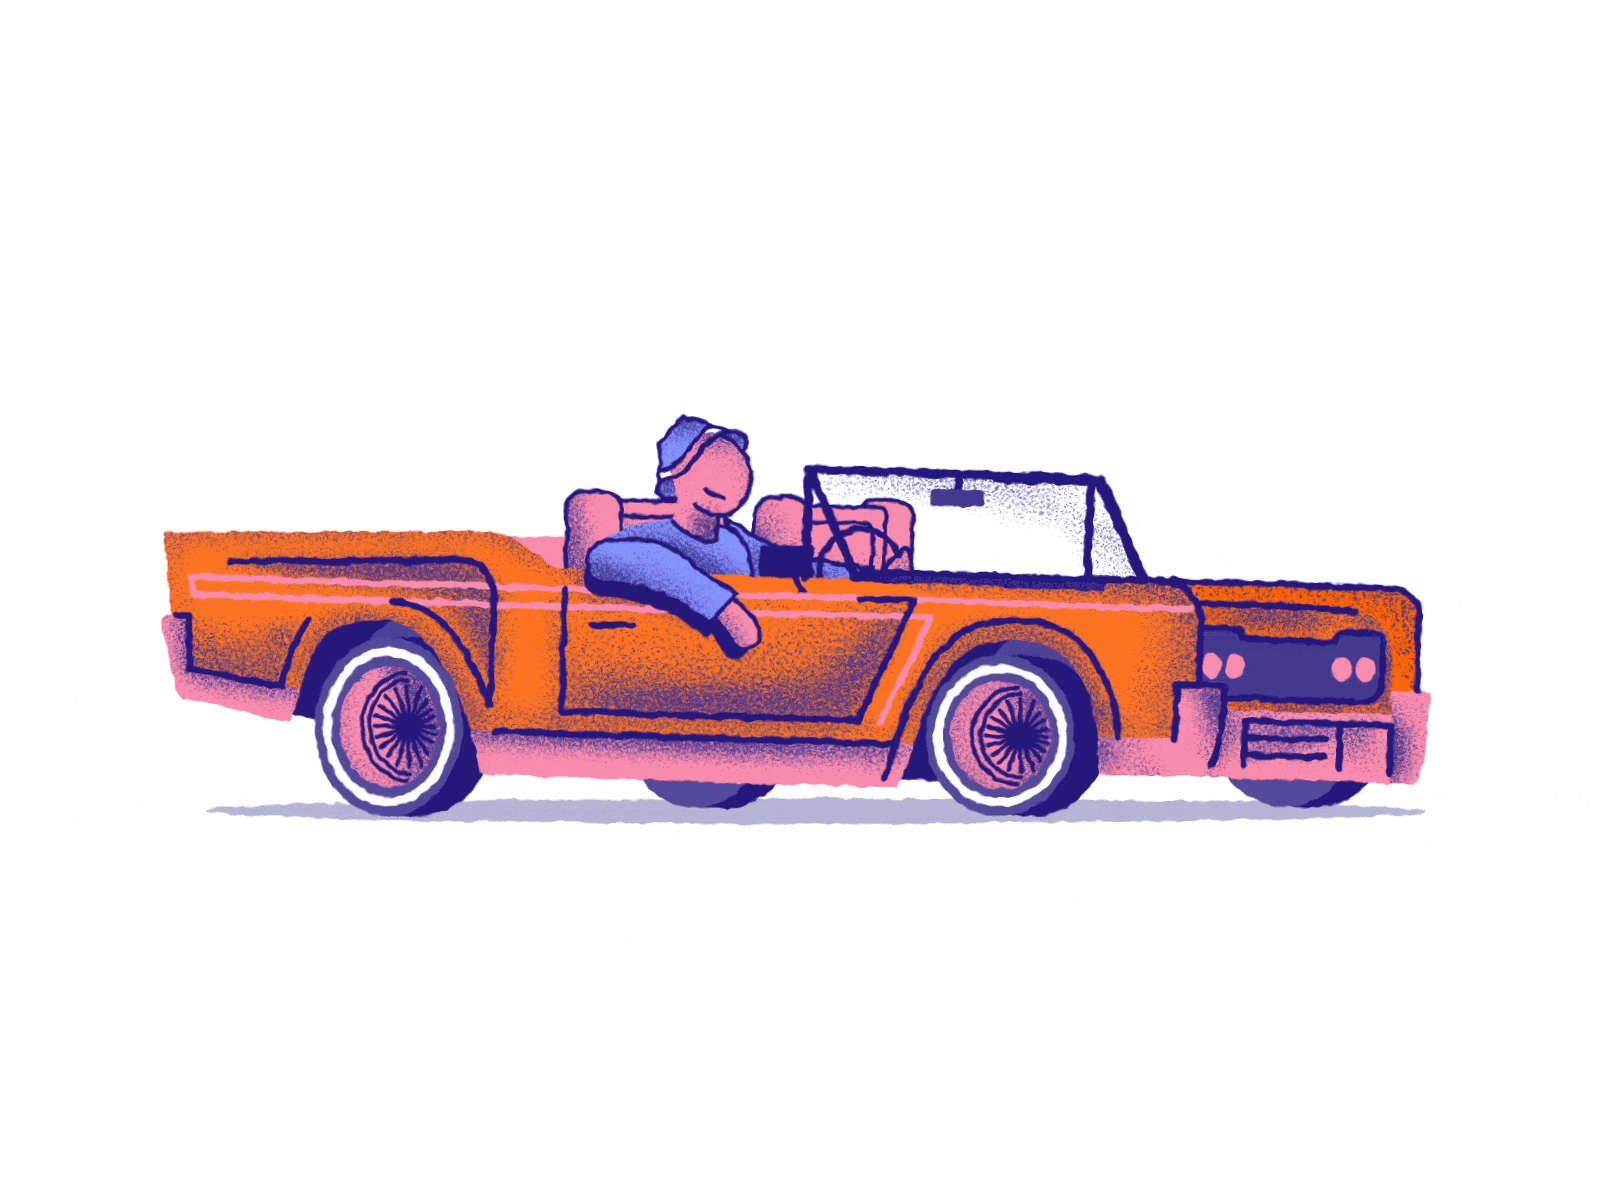 Low Rider animation car gritty illustration lo fi low rider